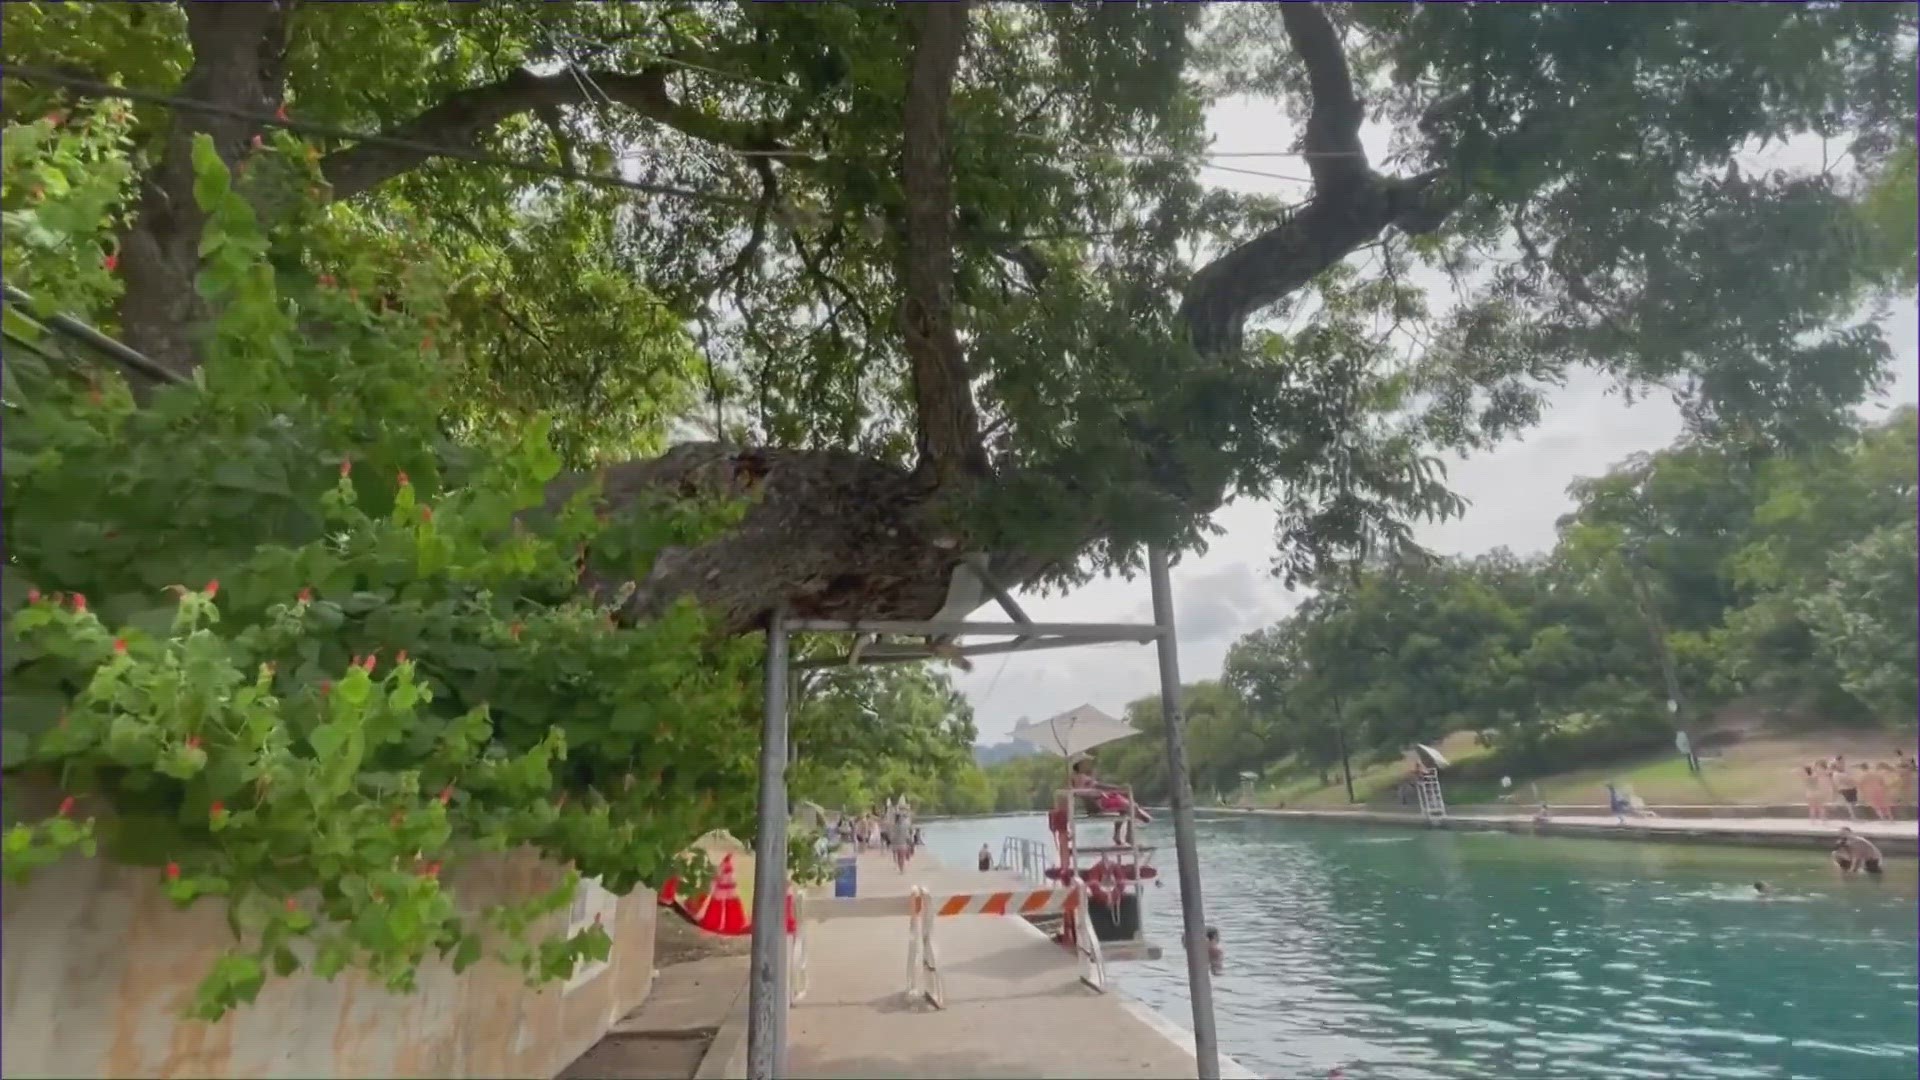 Staff in Austin's Parks and Recreation Department recommended a pecan tree named Flo be removed.